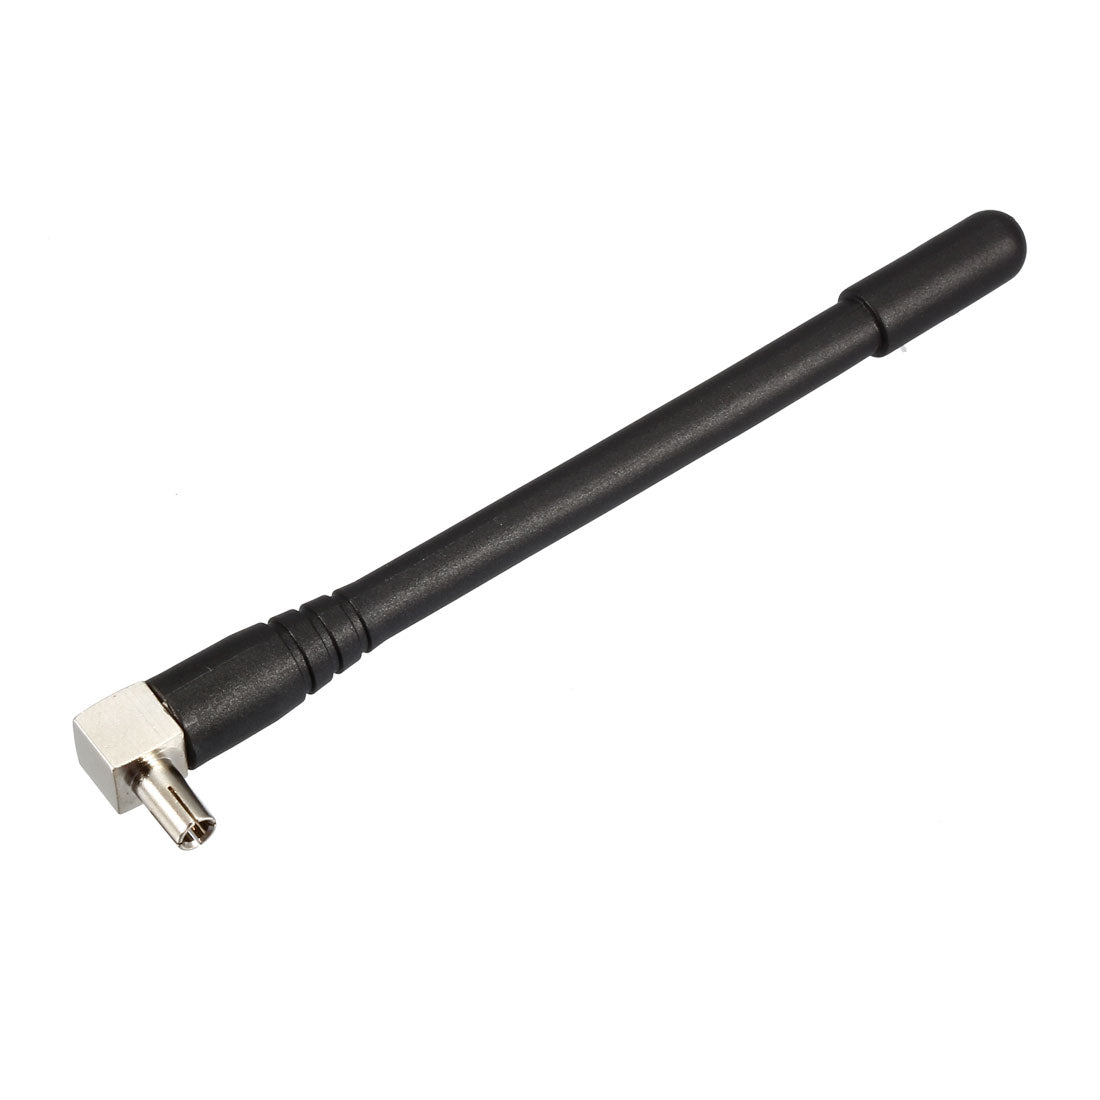 uxcell Uxcell GSM GPRS WCDMA LTE Antenna 3G 4G 3dBi 700-2700MHz TS9 Male Right Angle Connector Omni Directional 4Pcs